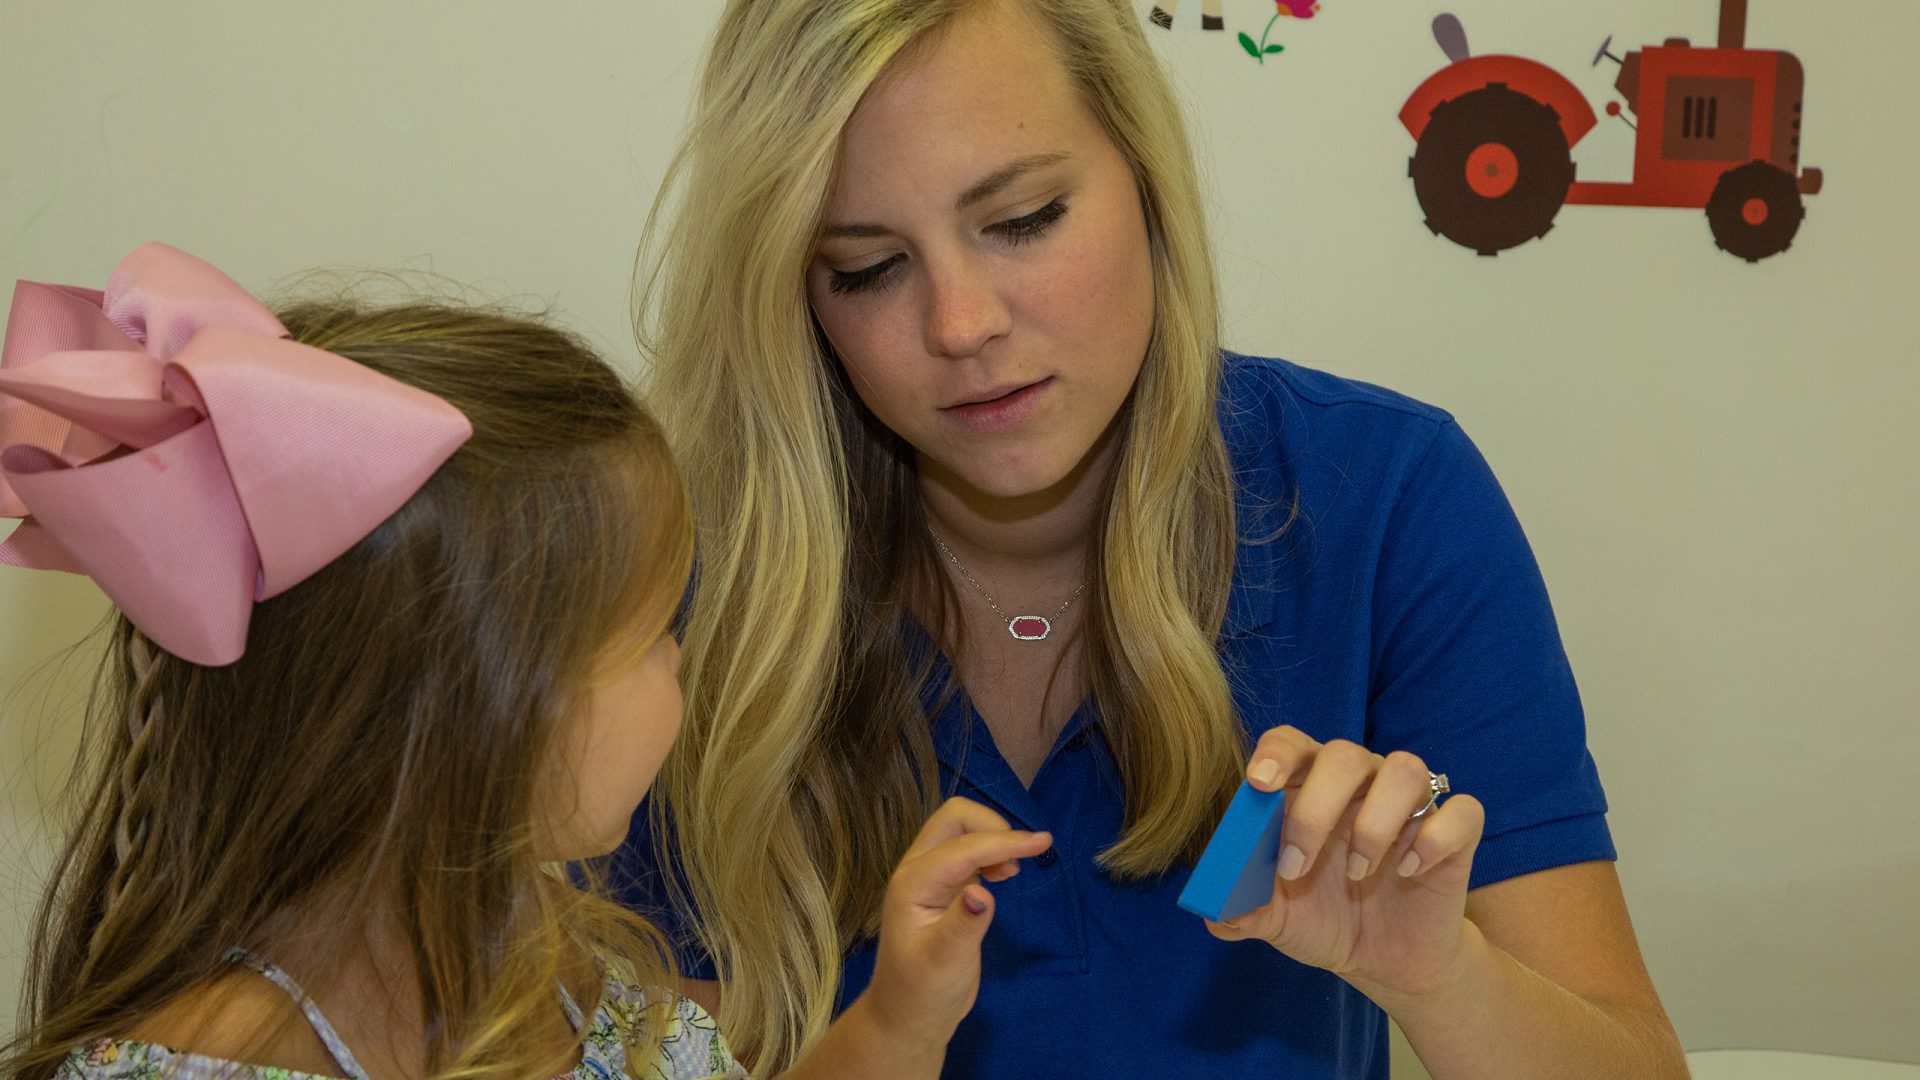 A Faulkner Speech Language Pathologist doing an activity with a young girl